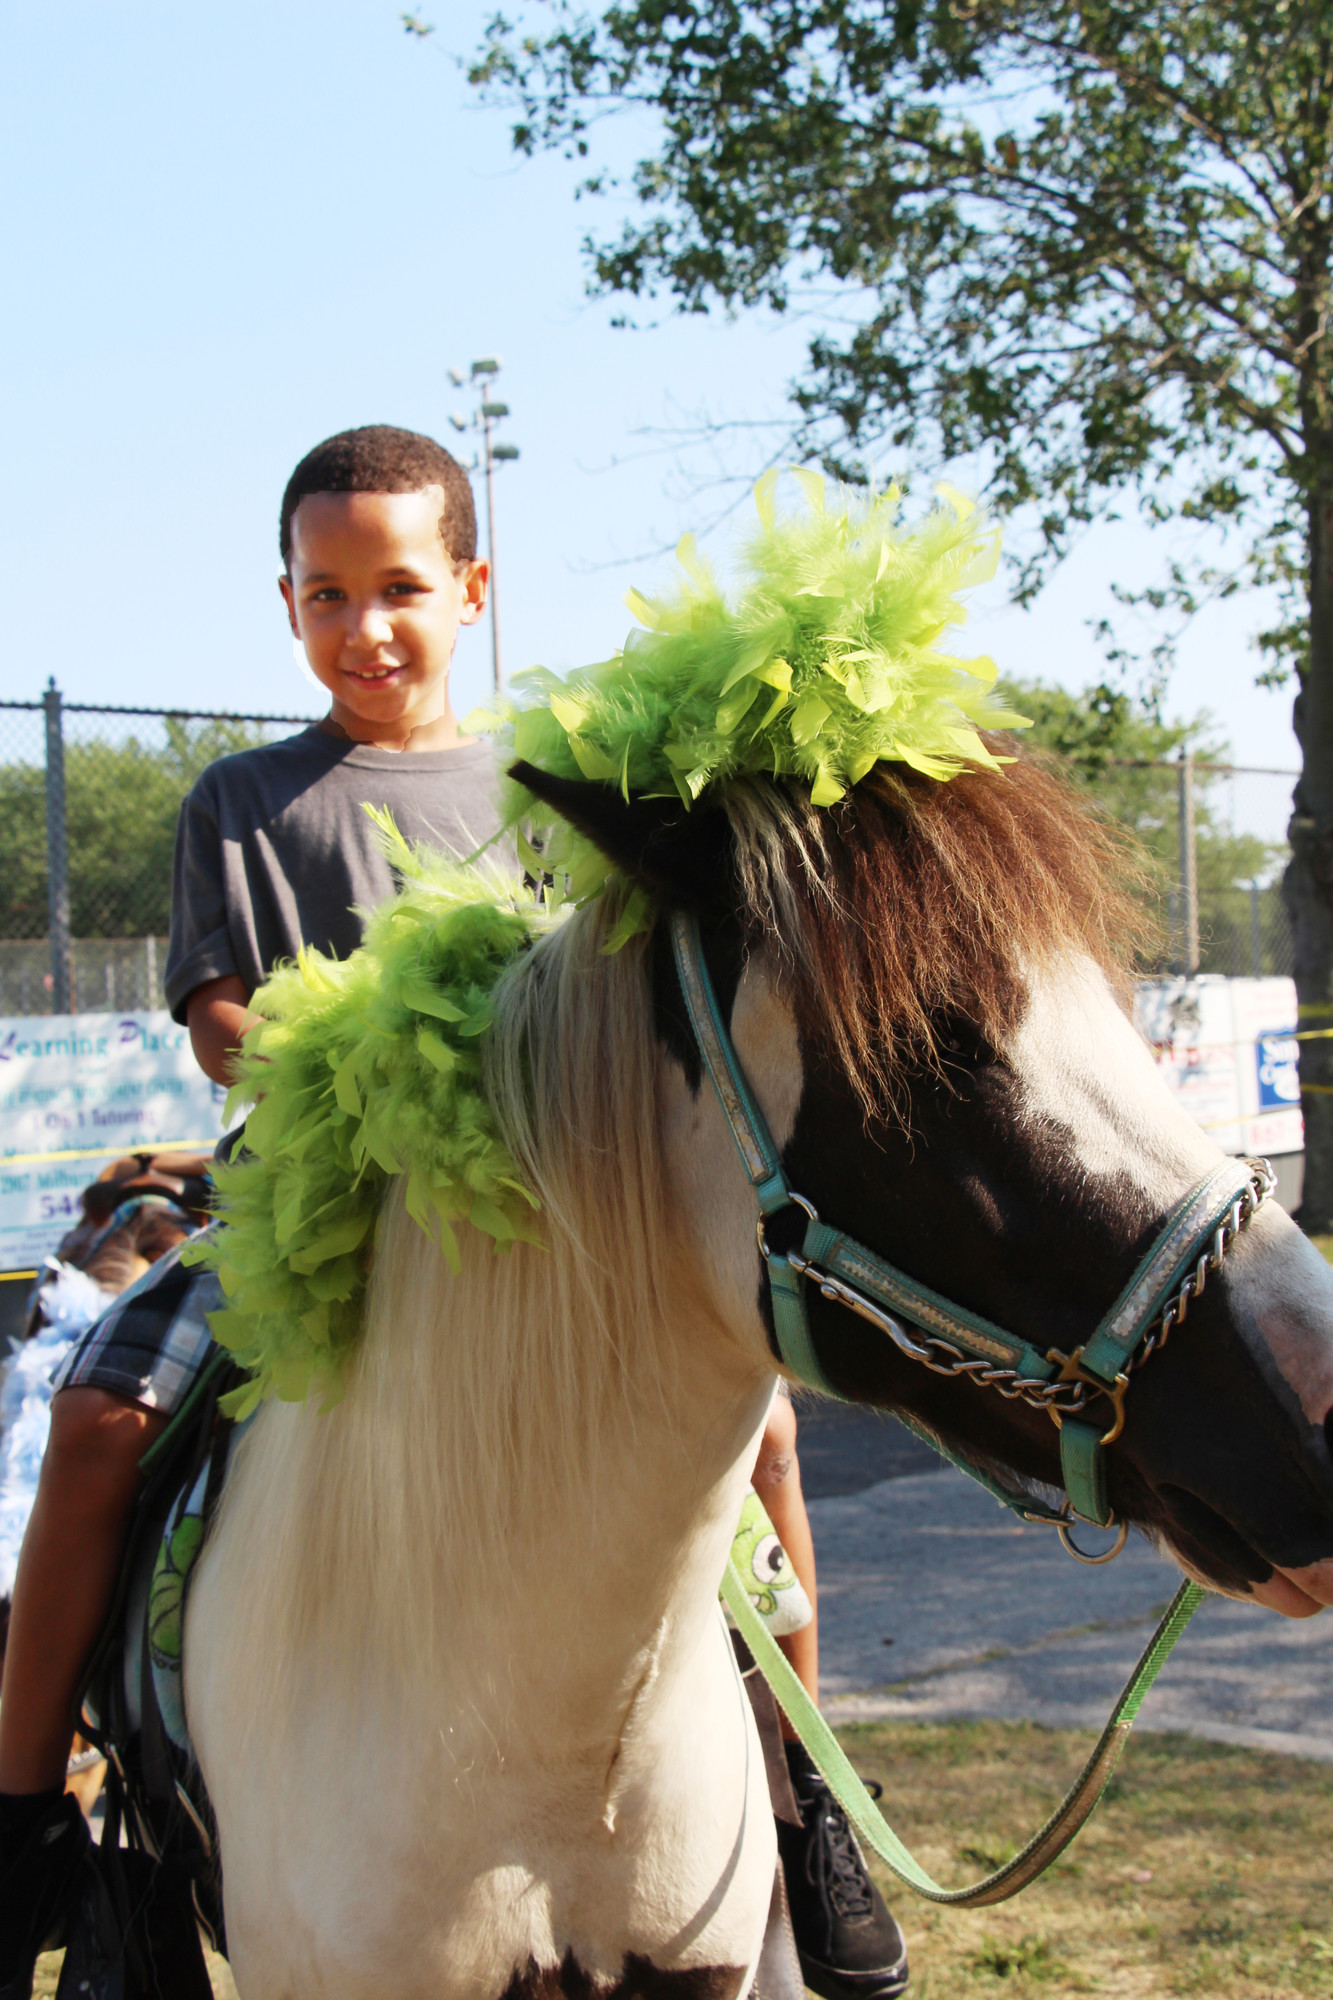 Kyree Pruce, 7, took a ride on a  pony around the park.